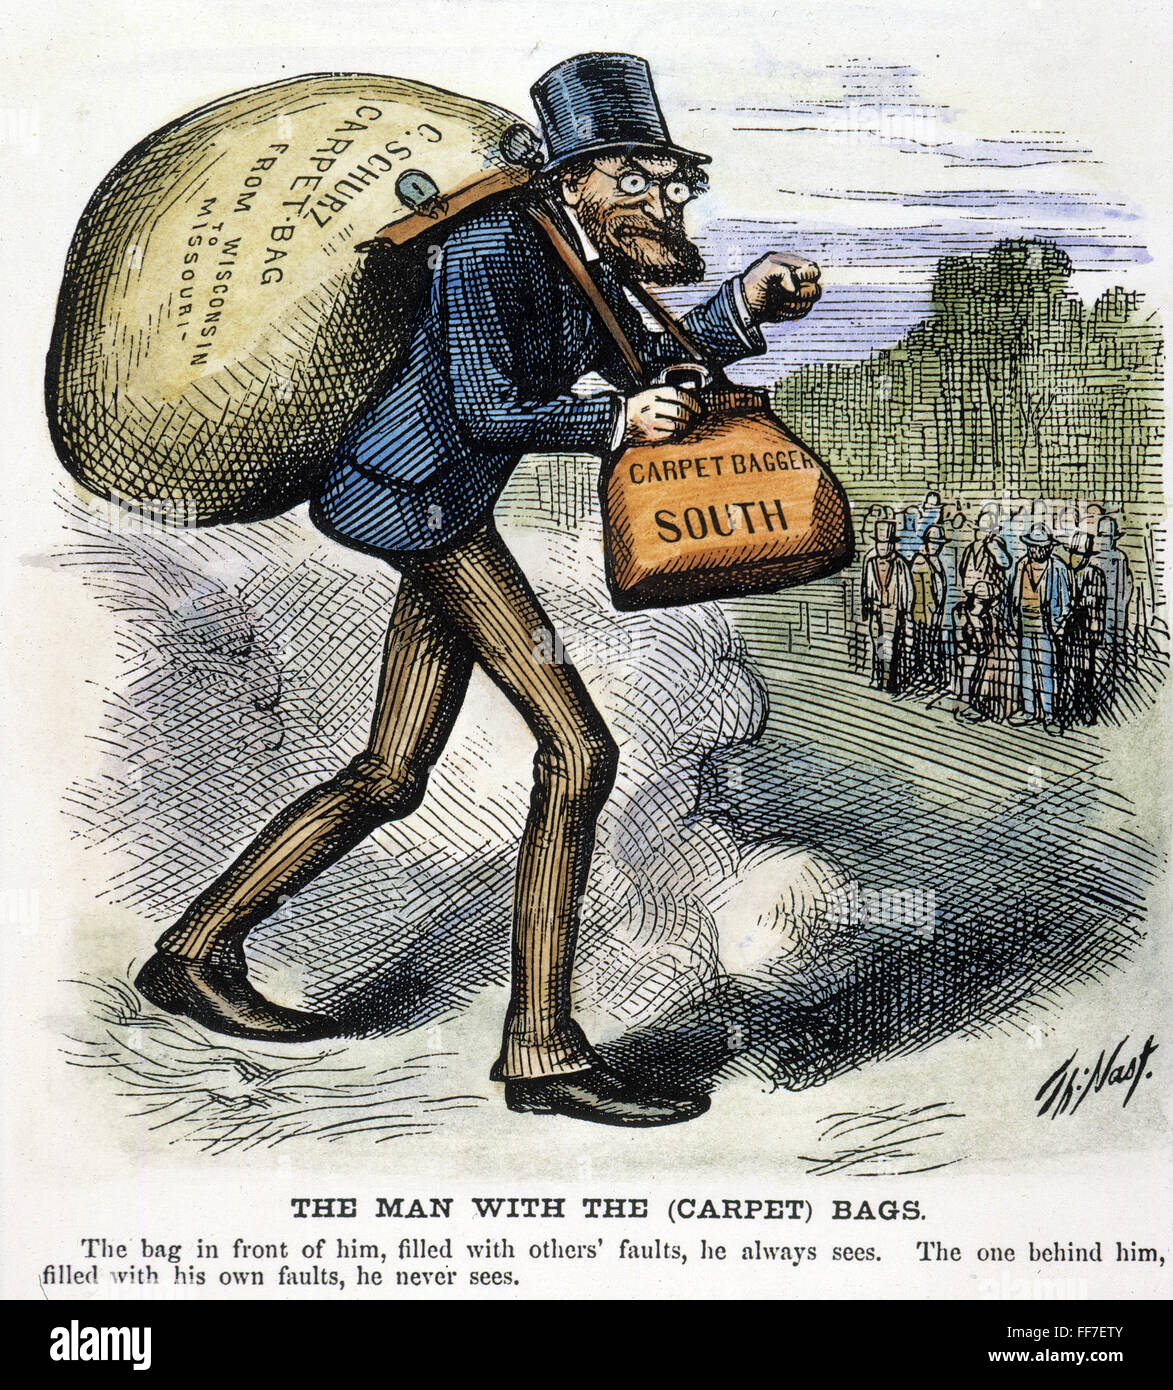 CARL SCHURZ: CARPETBAGGER. /nSchurz, an American army officer, politician, and reformer, vilified as a carpetbagger in an 1872 cartoon by Thomas Nast. Stock Photo